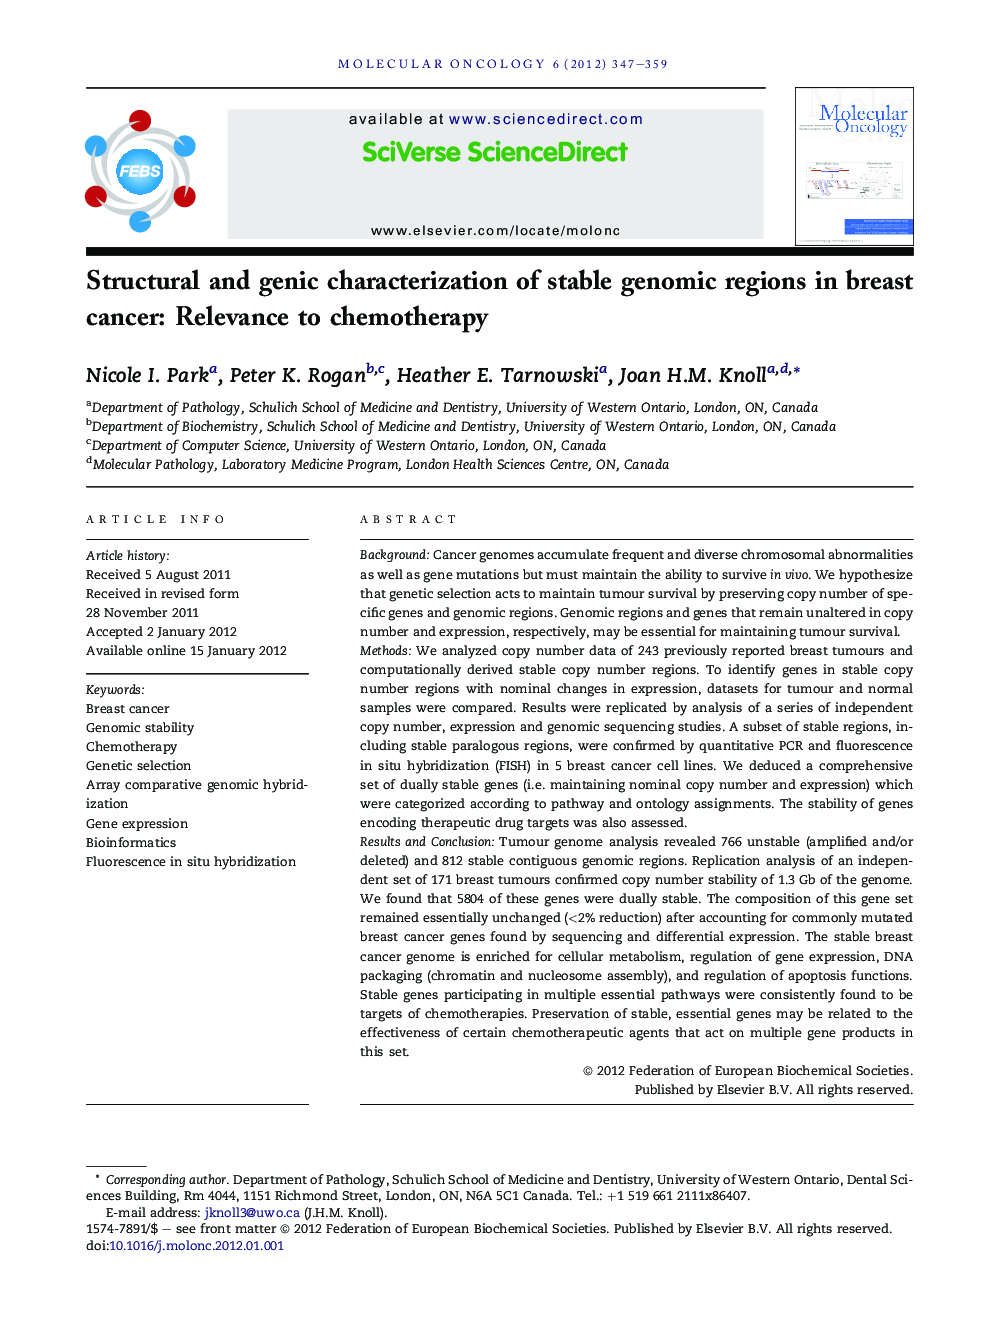 Structural and genic characterization of stable genomic regions in breast cancer: Relevance to chemotherapy